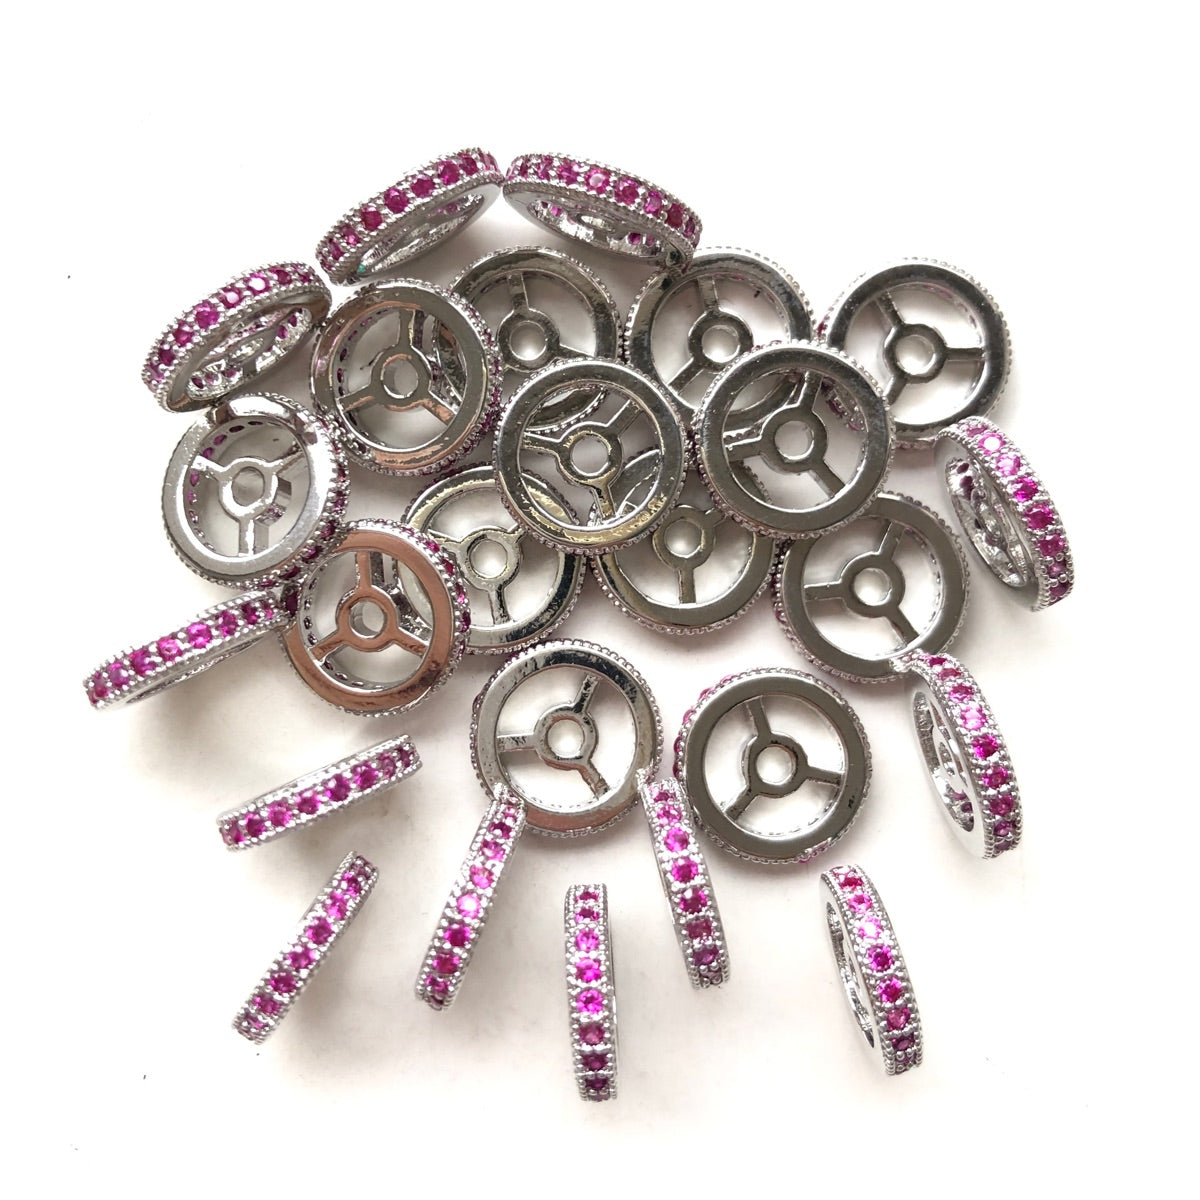 20pcs/lot 9.6/12mm Fuchsia CZ Paved Wheel Rondelle Spacers Silver CZ Paved Spacers New Spacers Arrivals Rondelle Beads Charms Beads Beyond